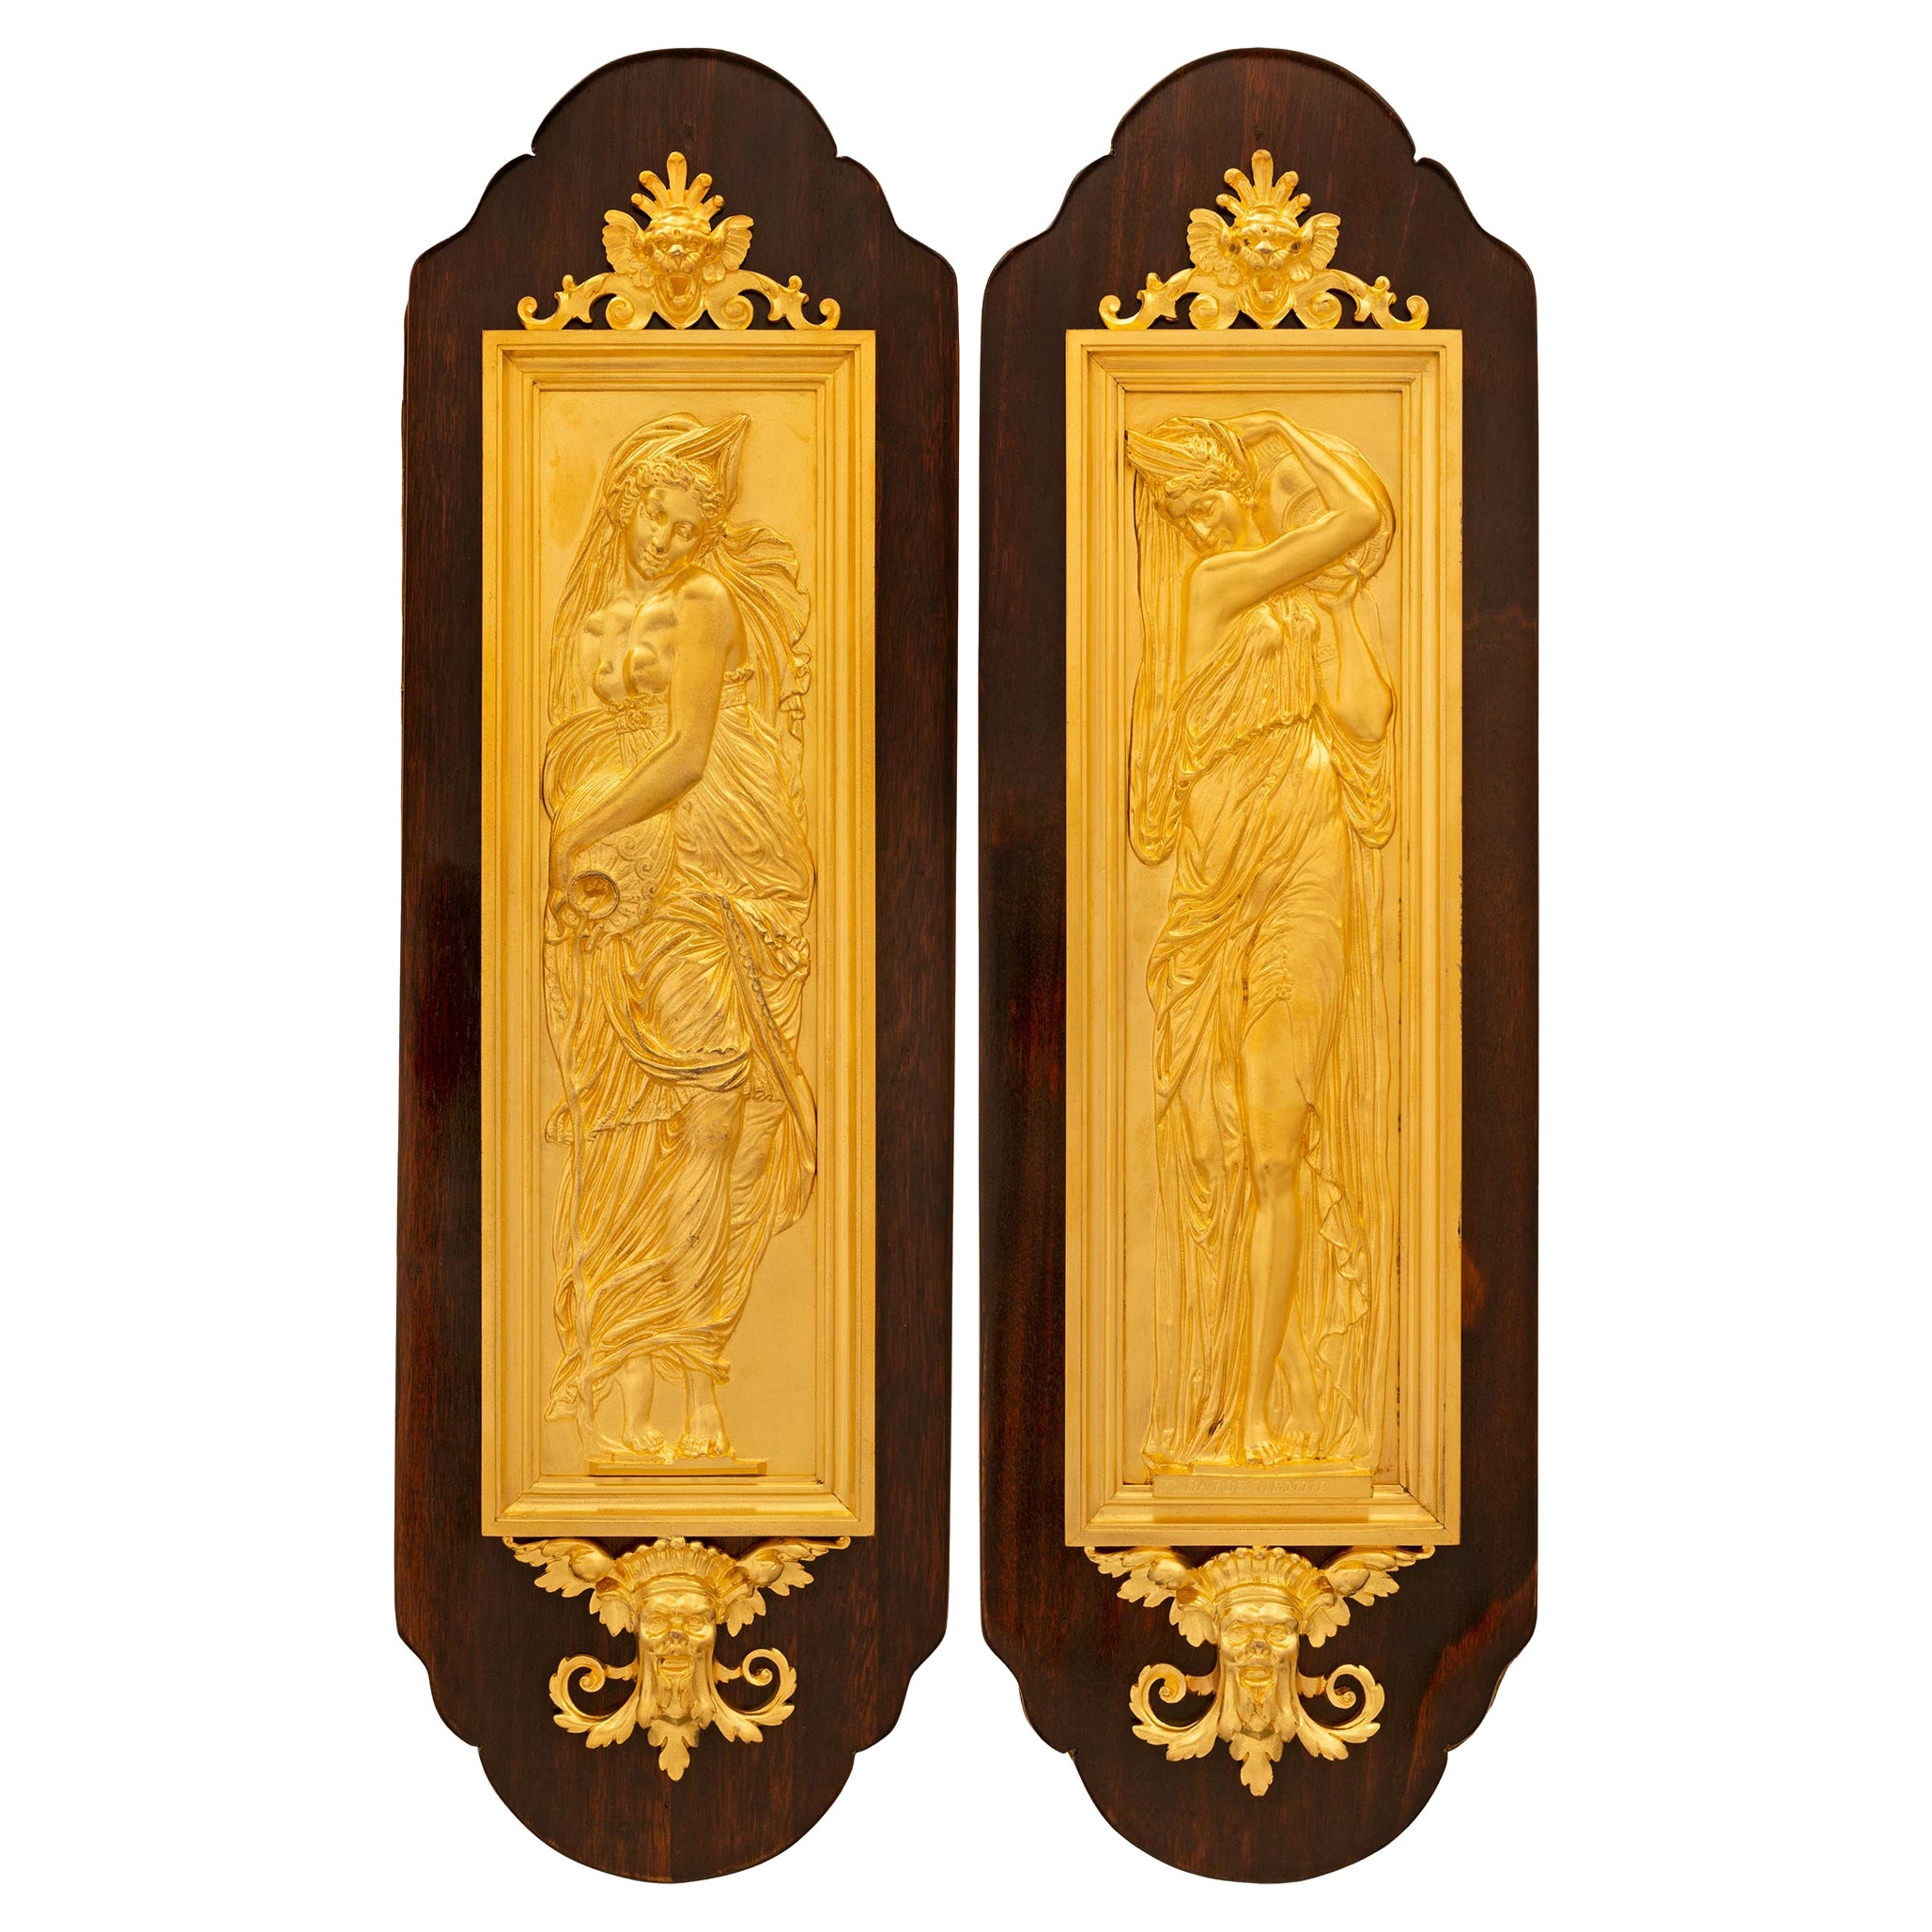 Pair of French 19th Century Belle Époque Period Mahogany & Ormolu Wall Plaques For Sale